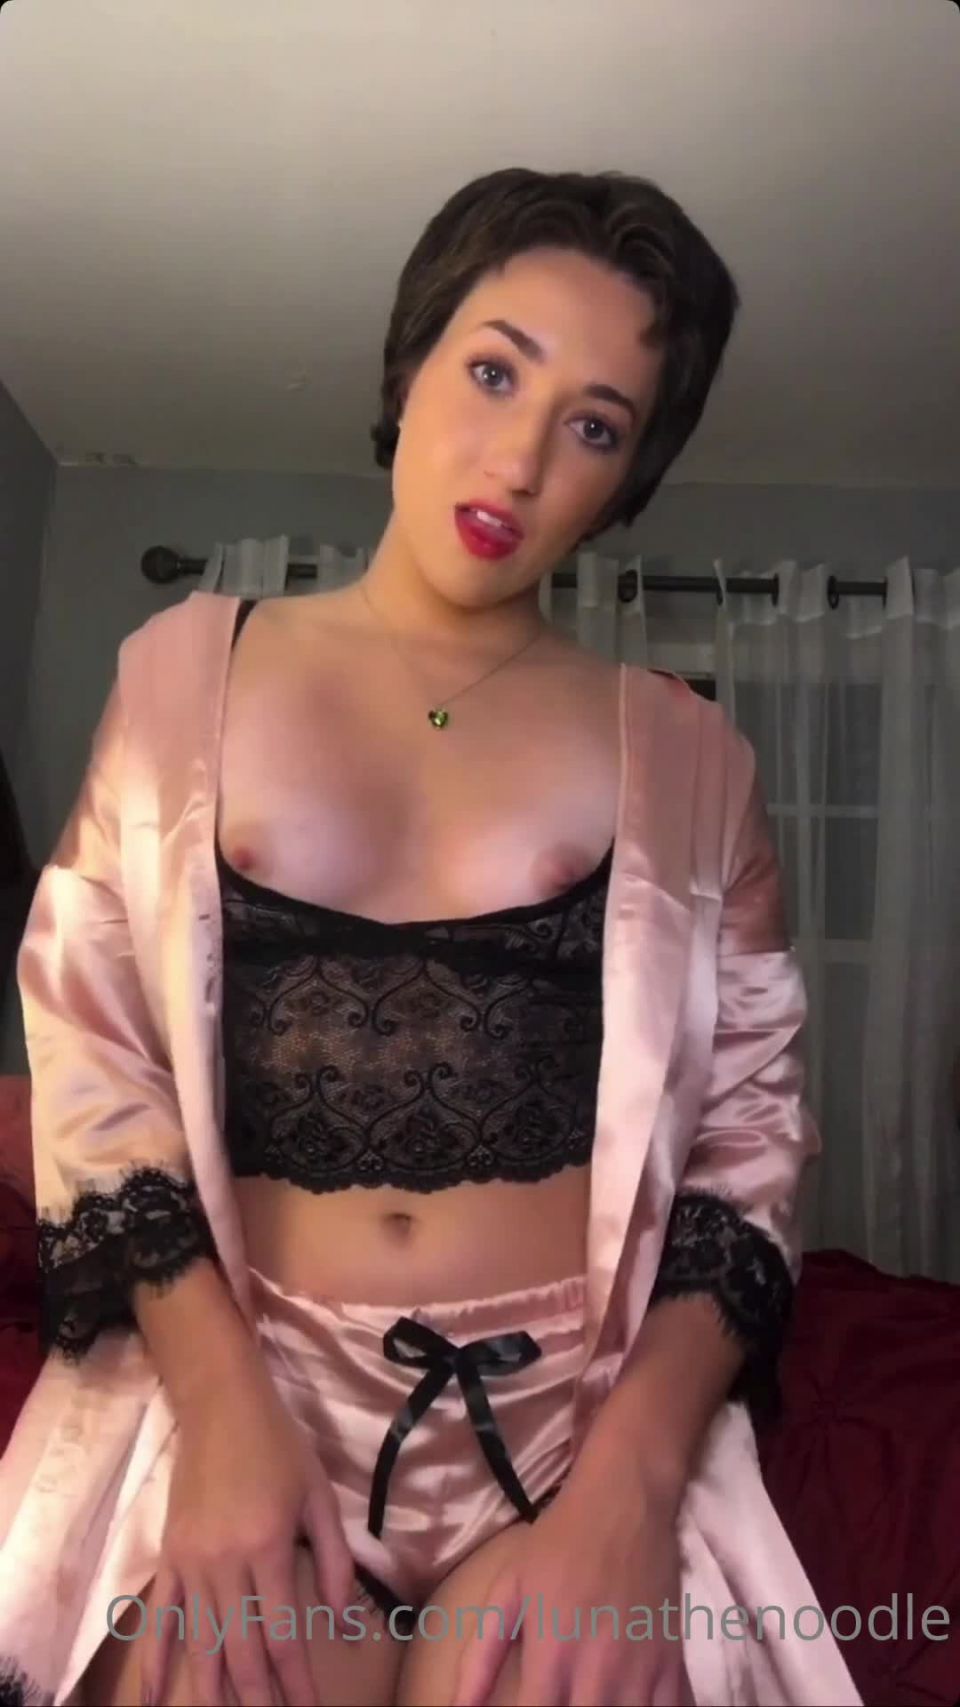 Luna the Noodle () Lunathenoodle - i think most of you follow me from tiktok so i made an onlyfans style tiktok 07-01-2021